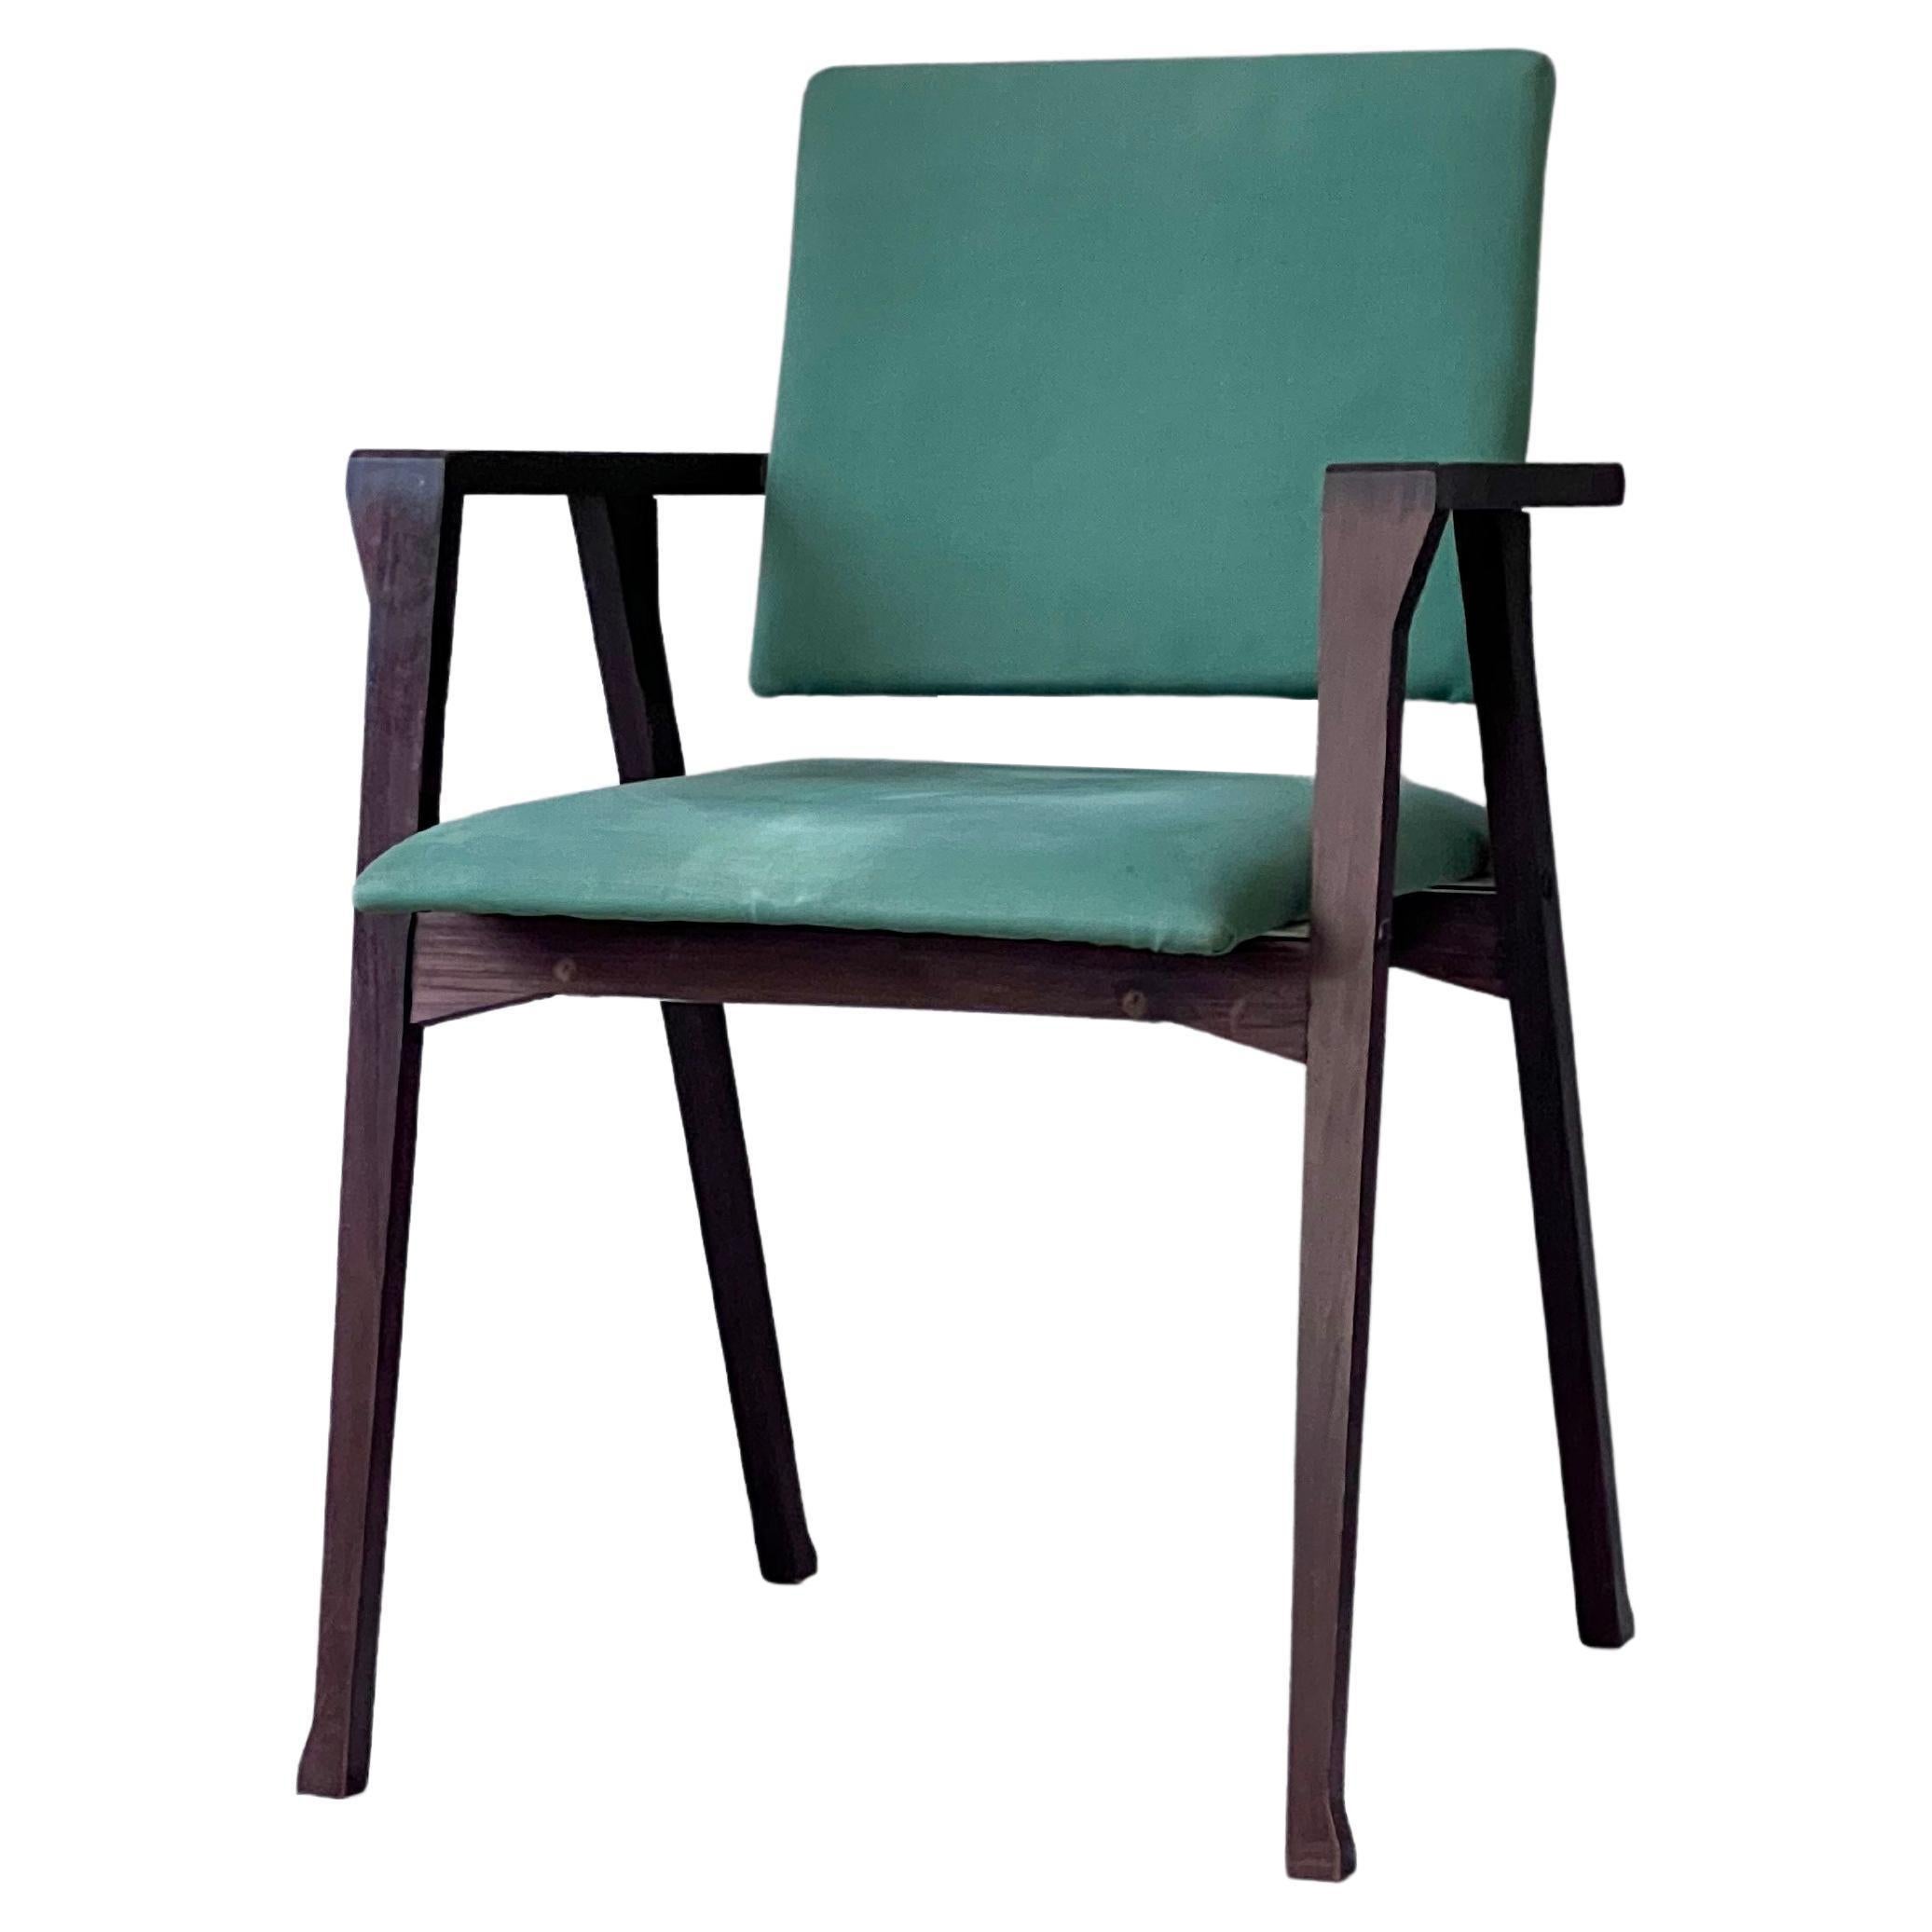 Italian Mid-Century Collectible Armchair, Dining Chair, Luisa by Franco Albini For Sale